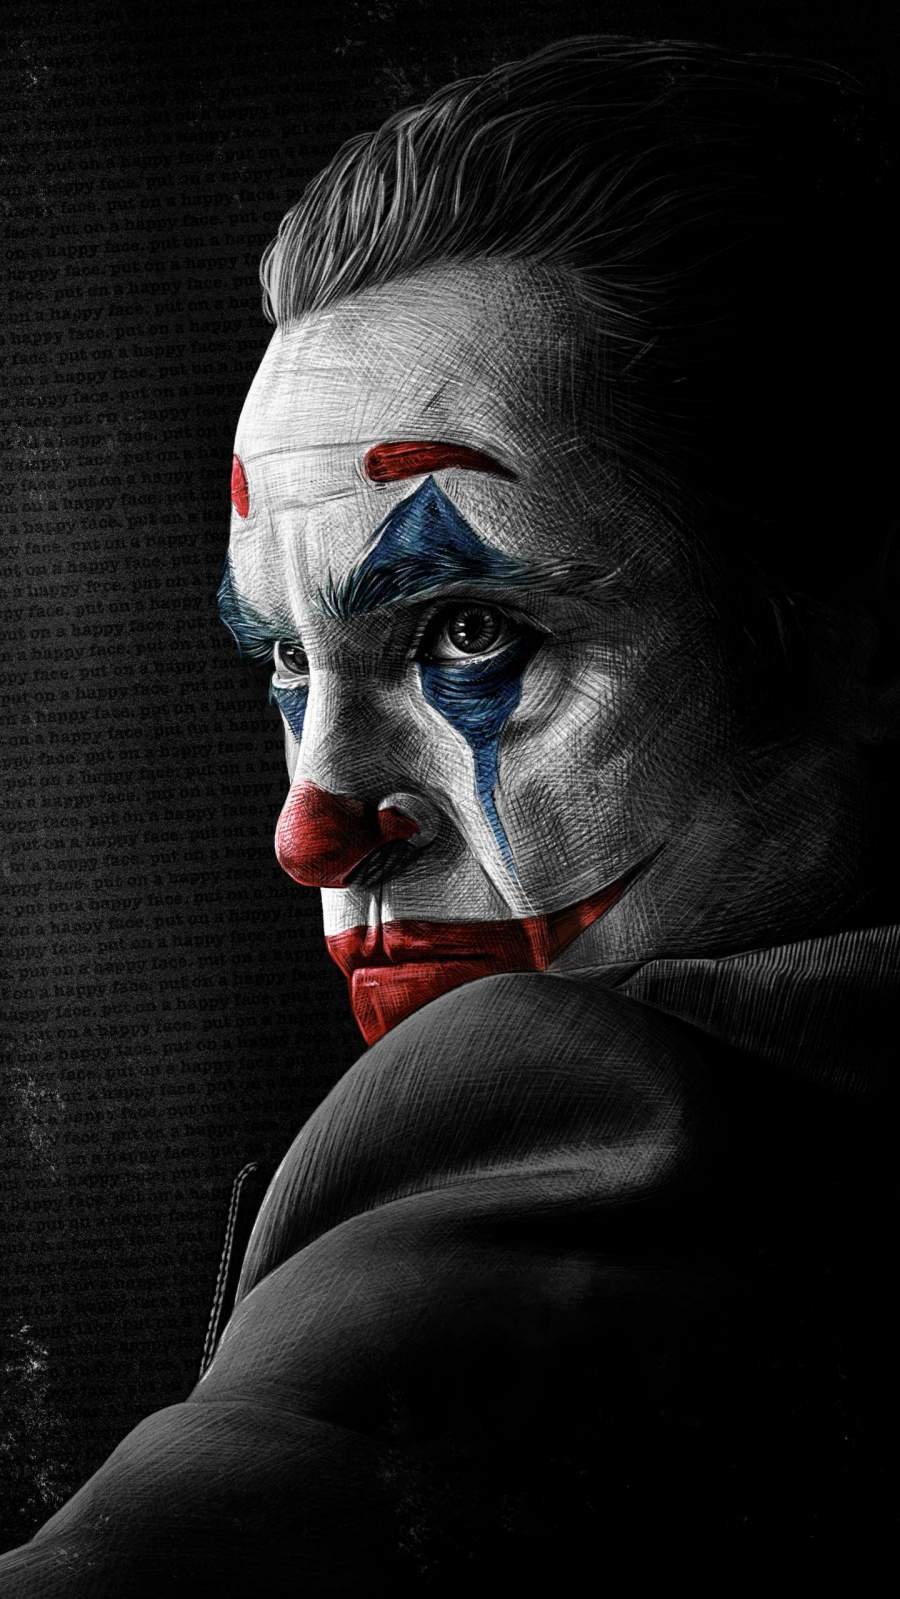 Joker IPhone Wallpaper. Joker Iphone Wallpaper, Joker Poster